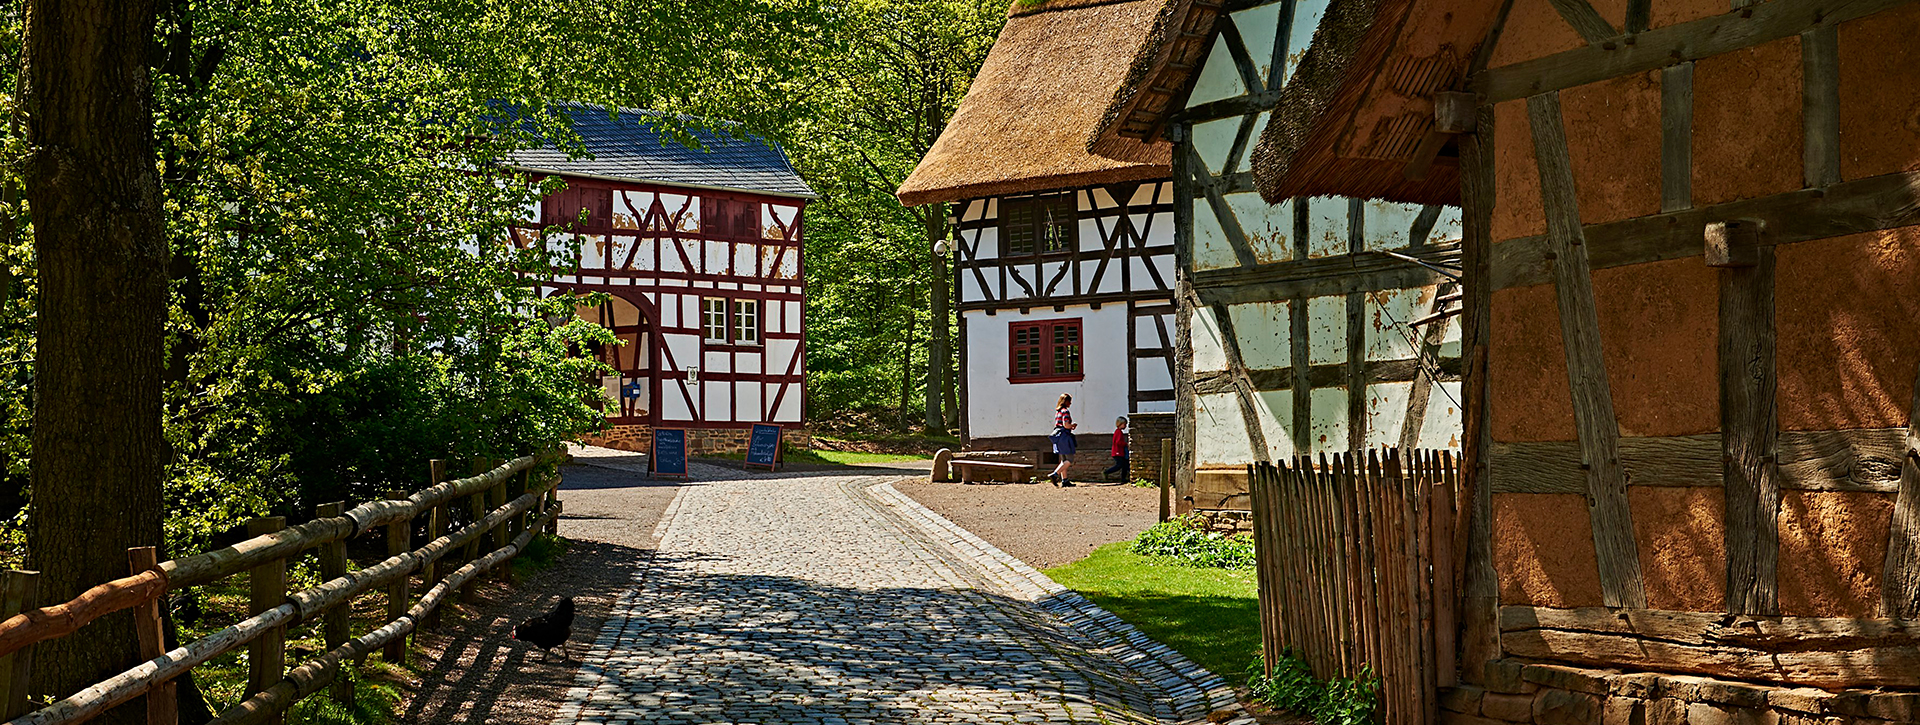 Way past half-timbered houses with cobblestones